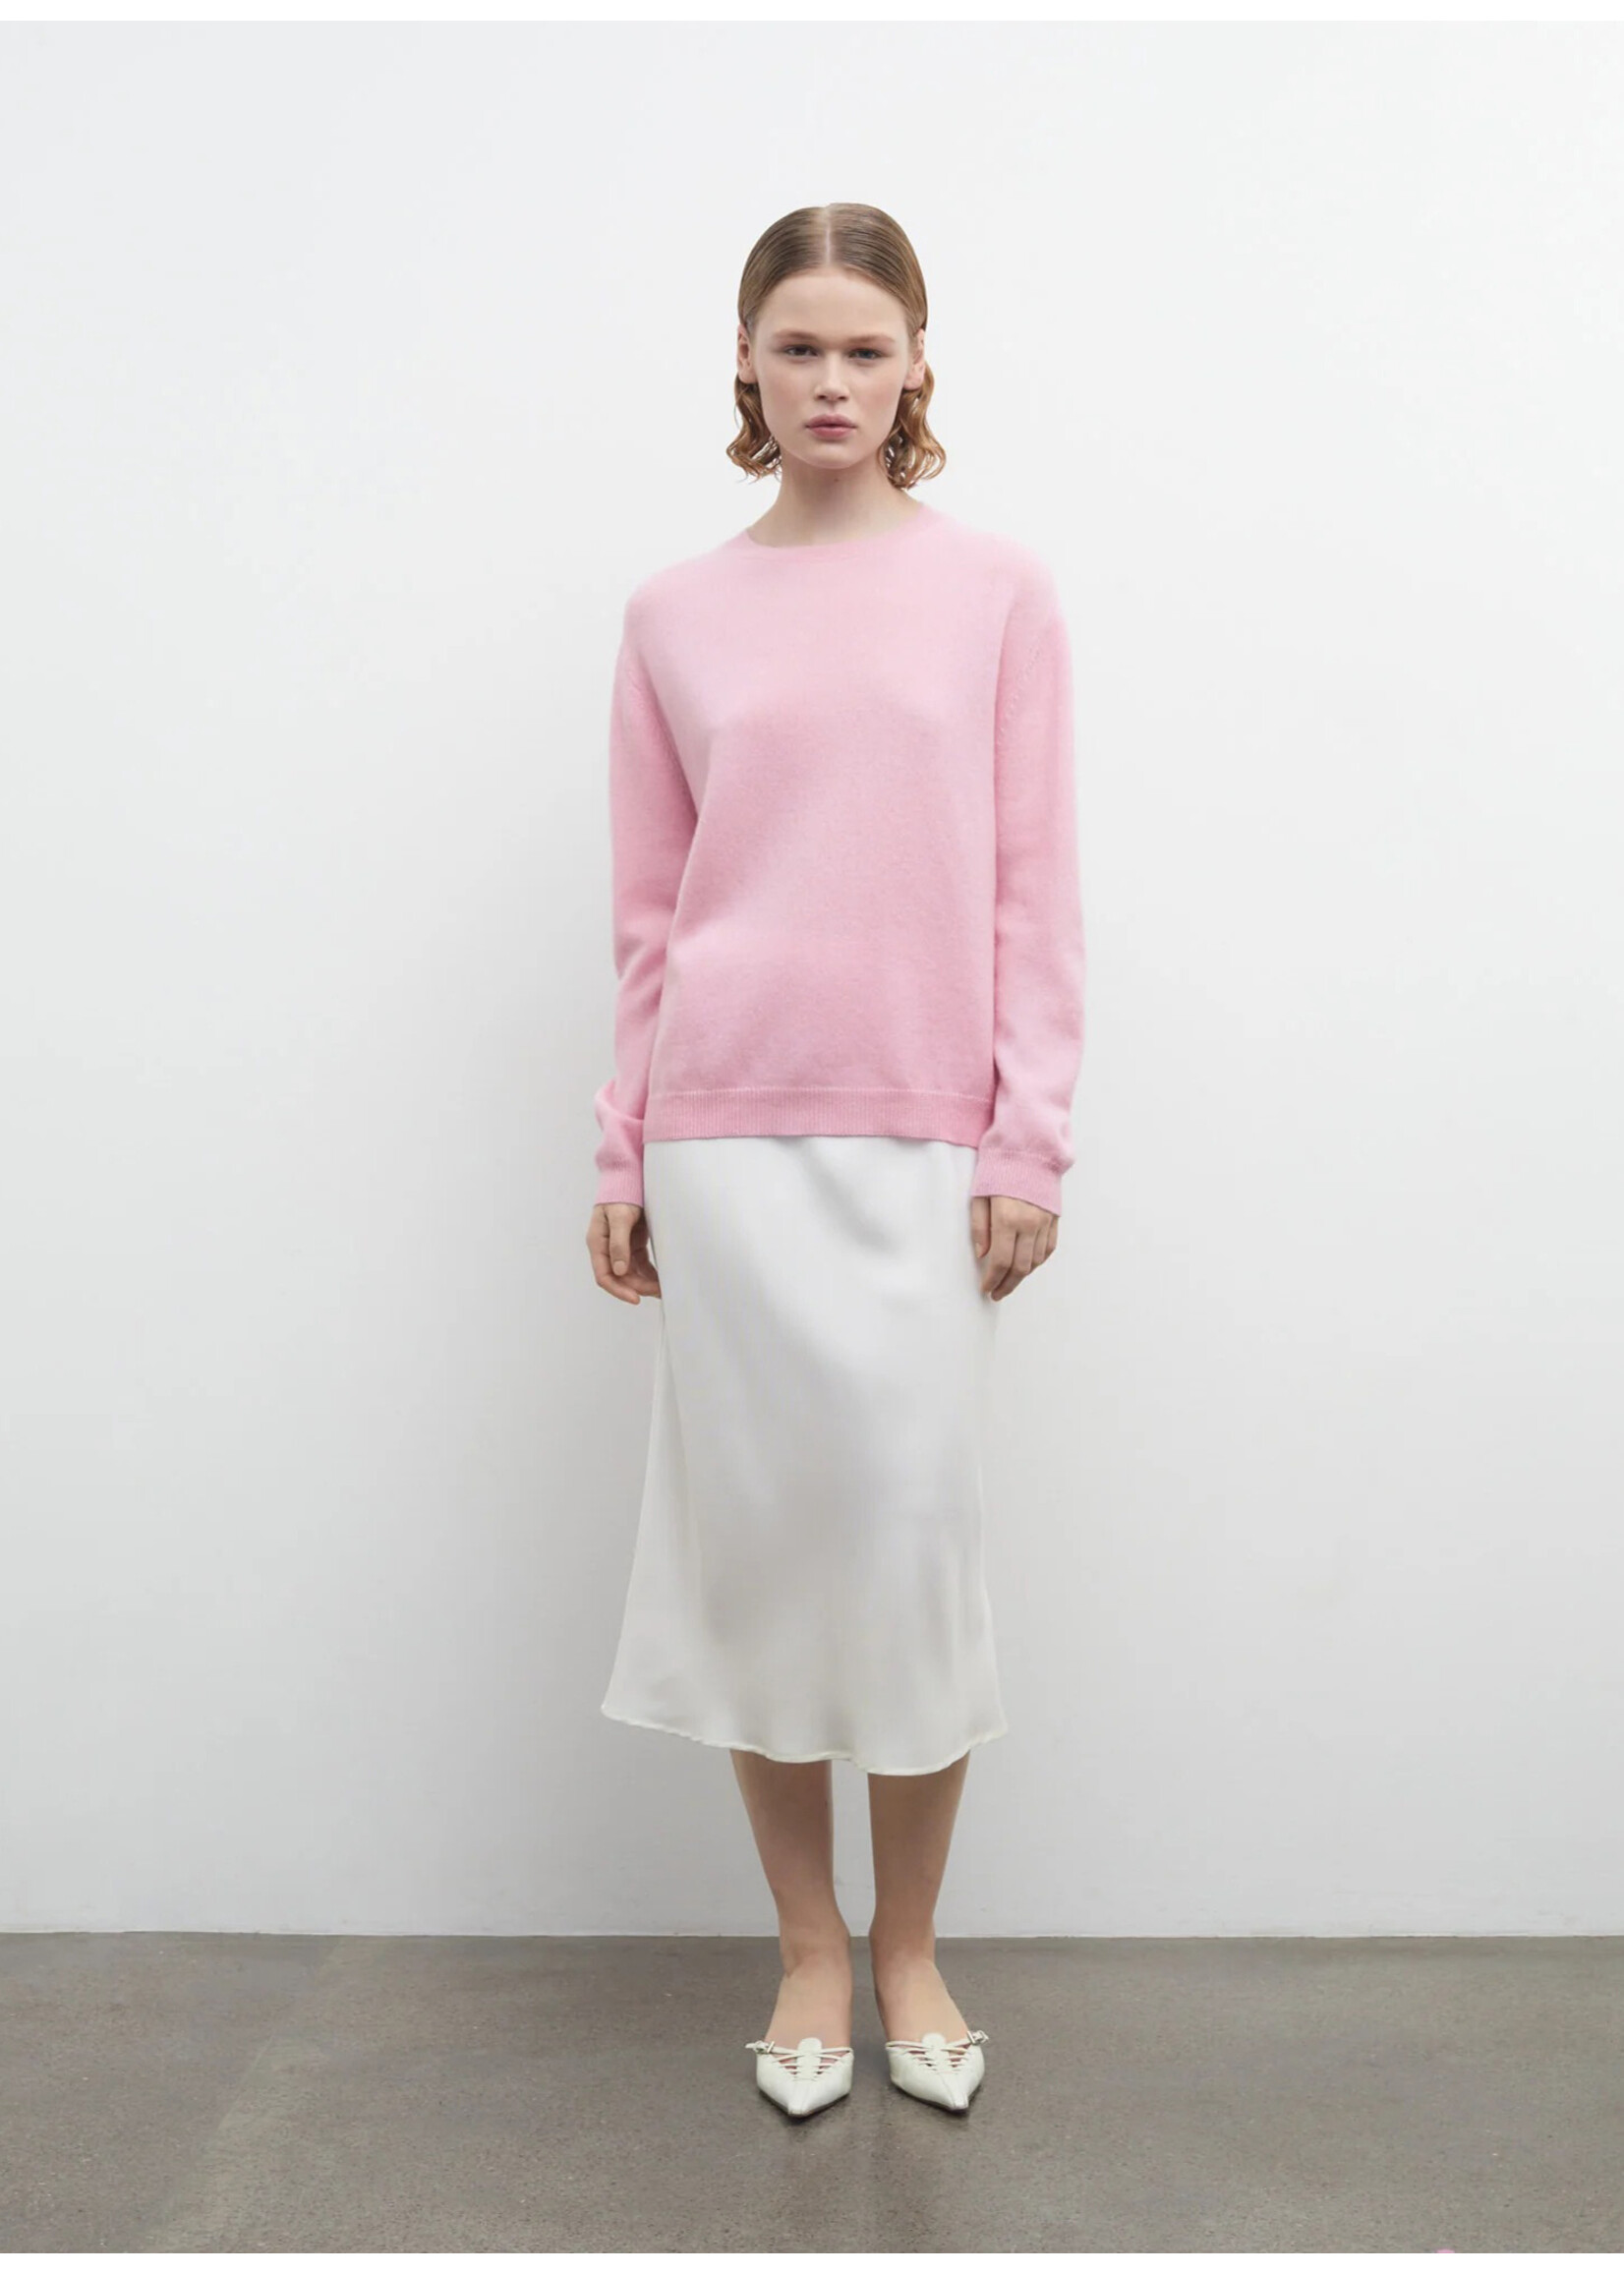 People's Republic of Cashmere Women's Boxy O-Neck Light Pink